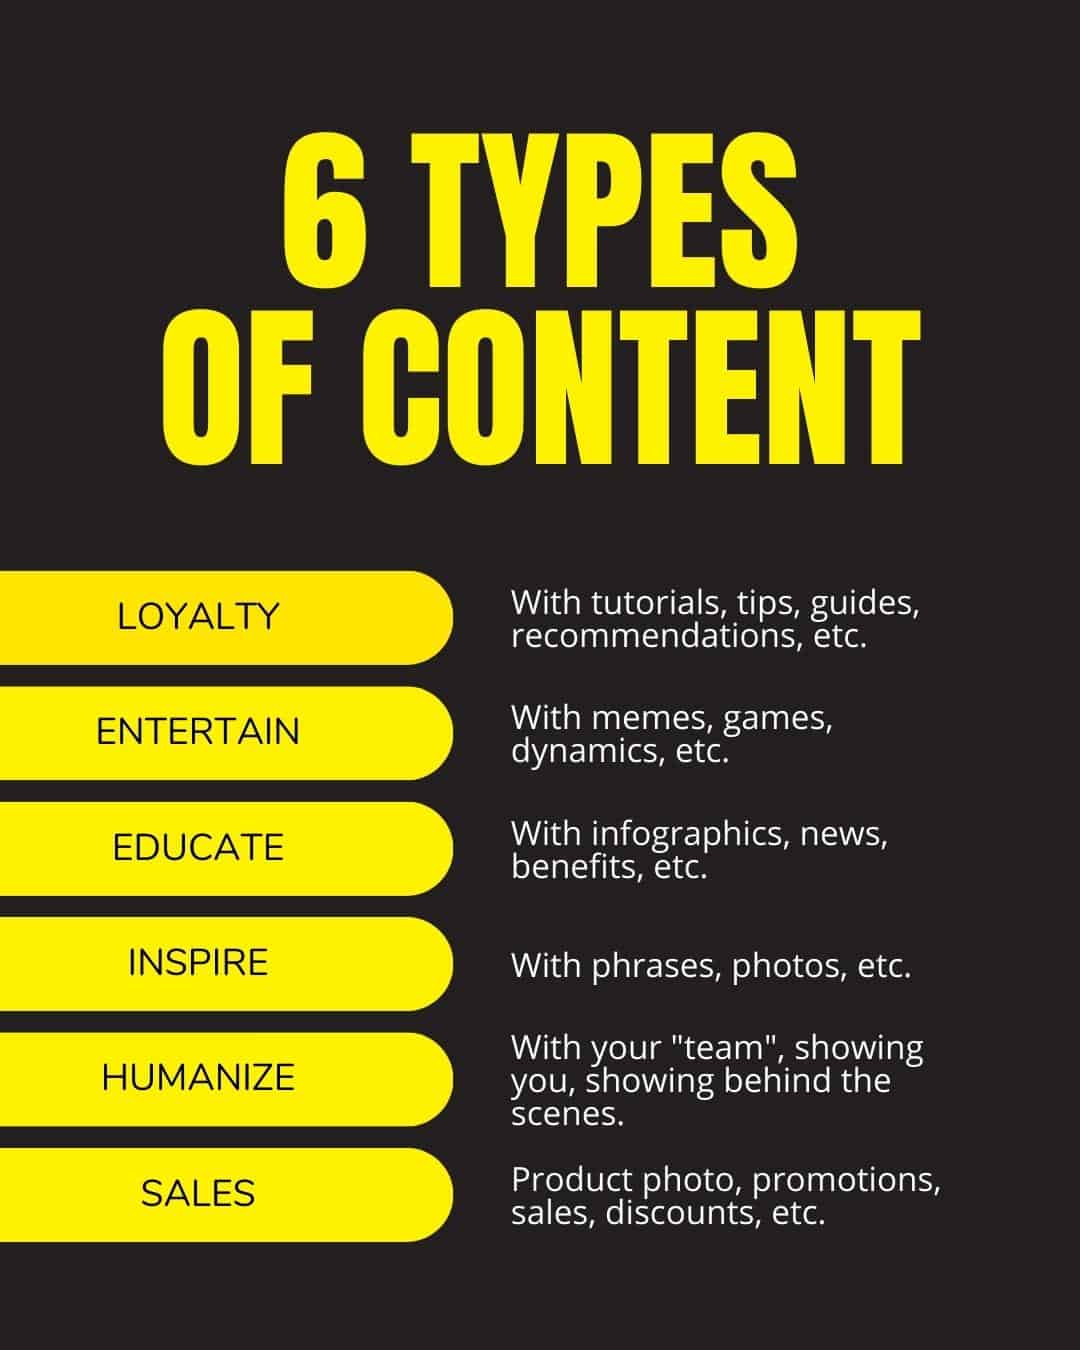 6 types of content